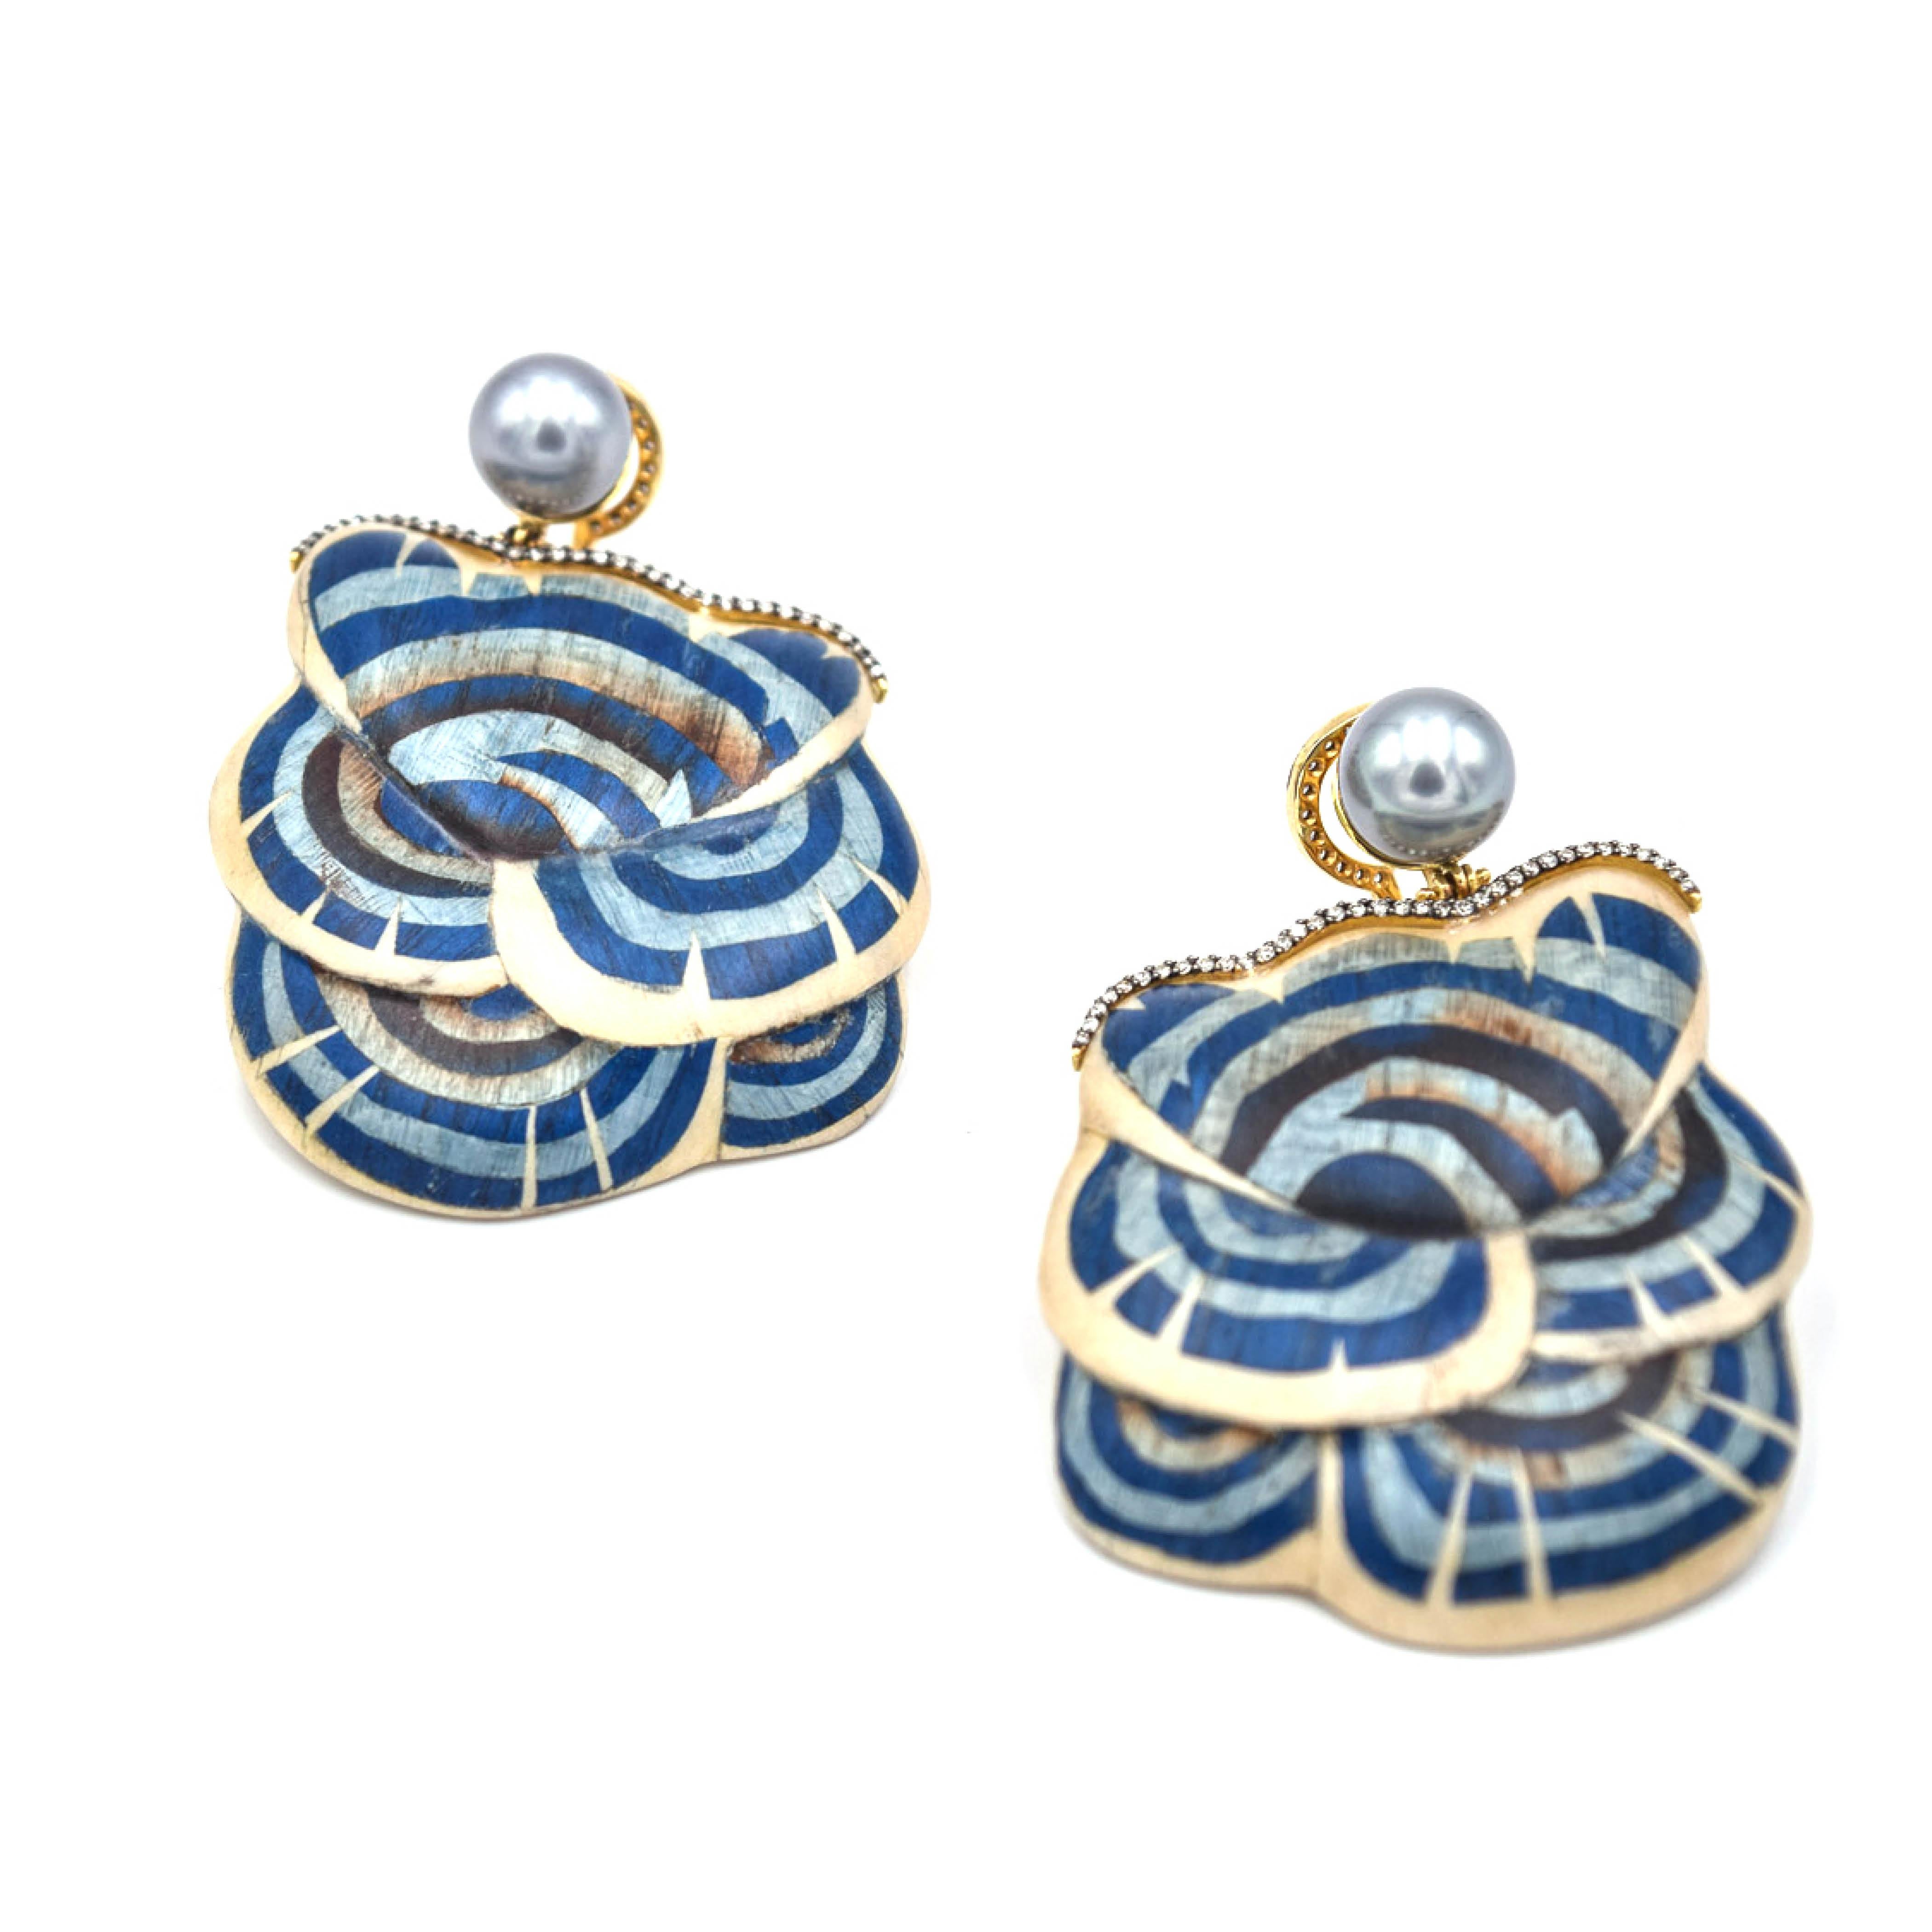 Exposing the rich colors and patterns embedded within cultures all around the world, Silvia Furmanovich designs distinctive jewelry inspired by nature and ancestry.

These blue mushroom marquetry earrings feature grey pearls and light brown